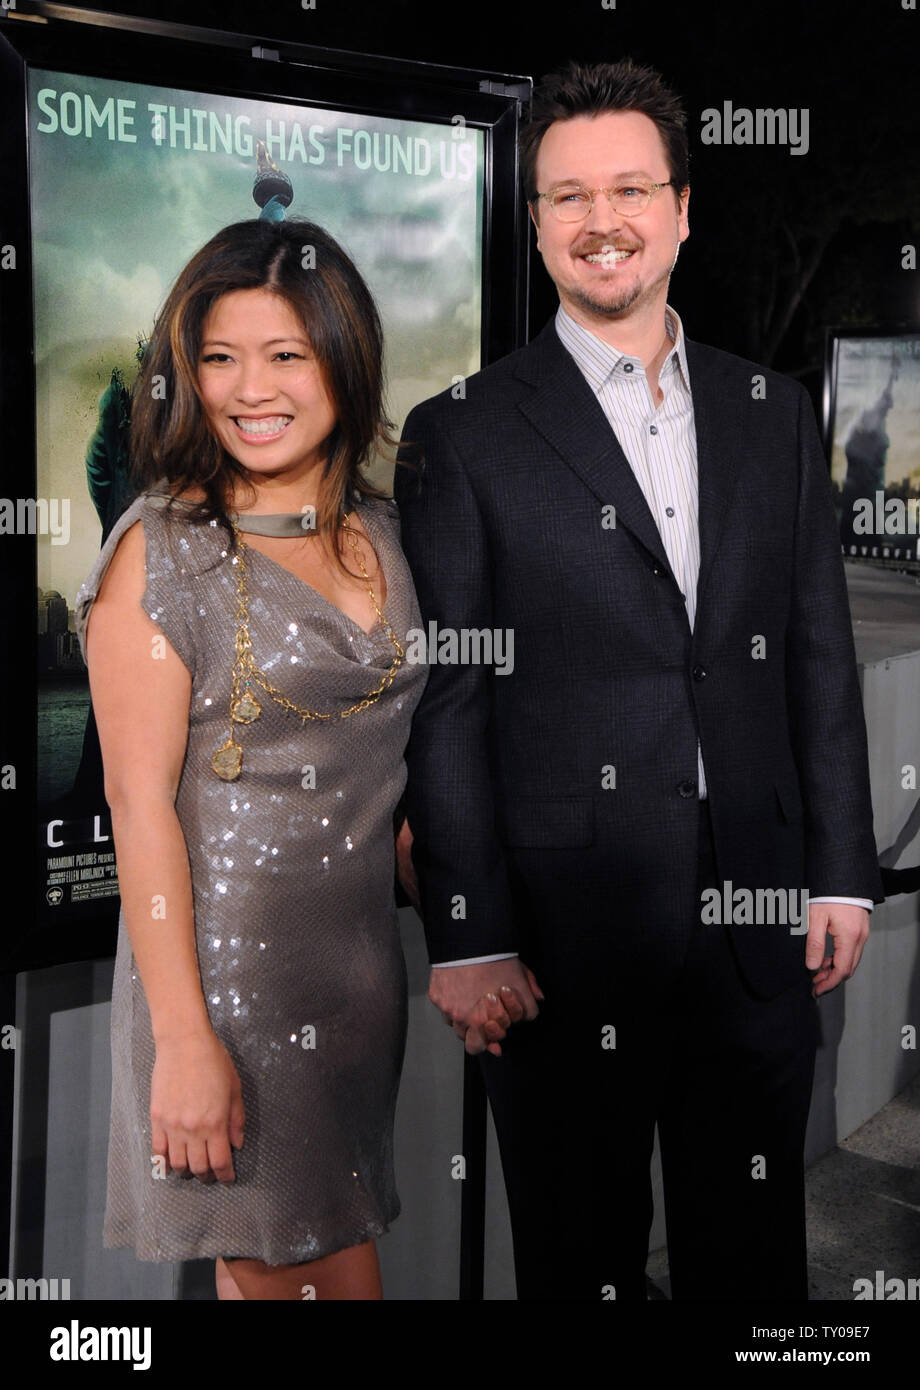 Matt Reeves, who directed the motion picture sci-fi thriller "Cloverfield",  attends the premiere of the film with Melinda Wang at Paramount Studios in  Los Angeles on January 16, 2008. (UPI Photo/Jim Ruymen